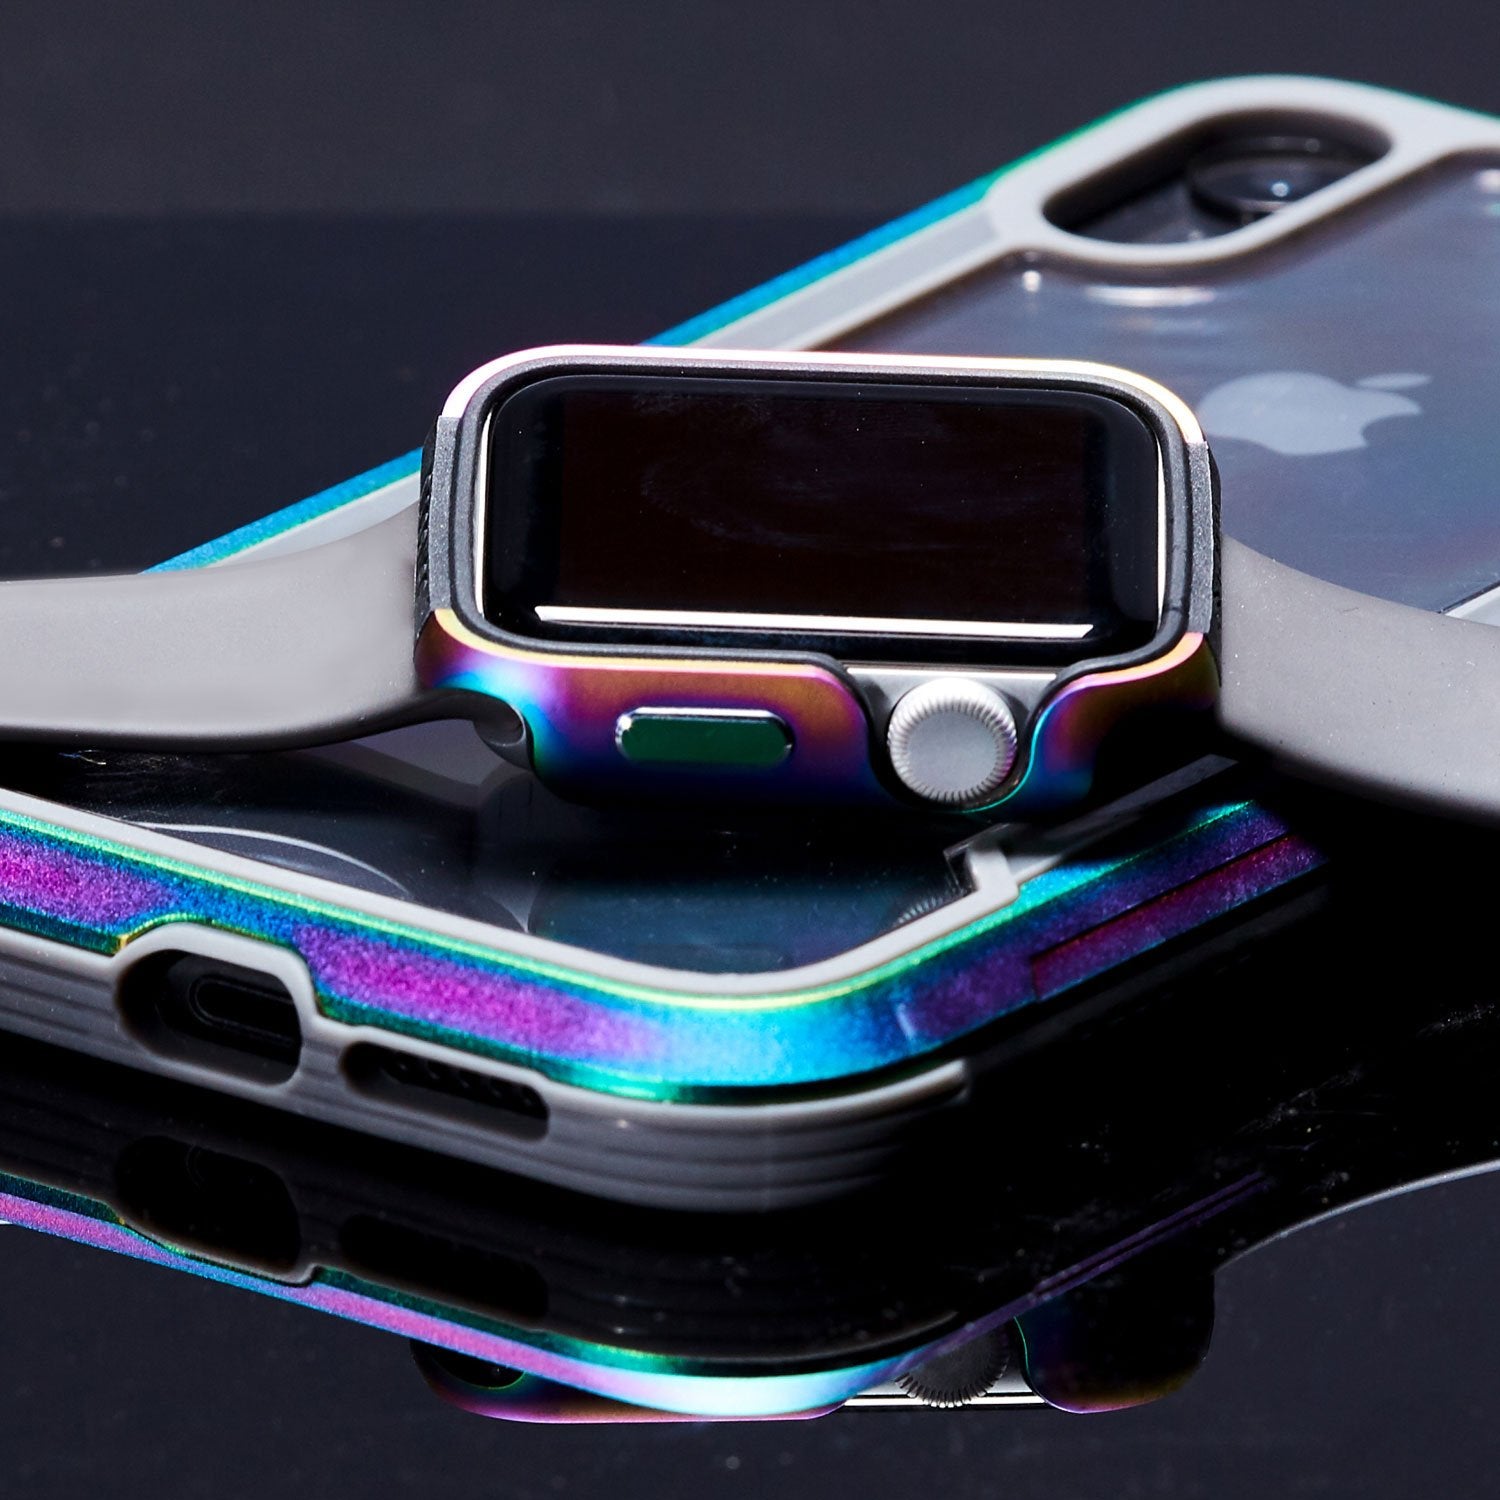 An iPhone case with a rainbow-colored Raptic Apple Watch 44mm Case - EDGE attached to it, crafted from premium machined anodized aluminum that protects your device.